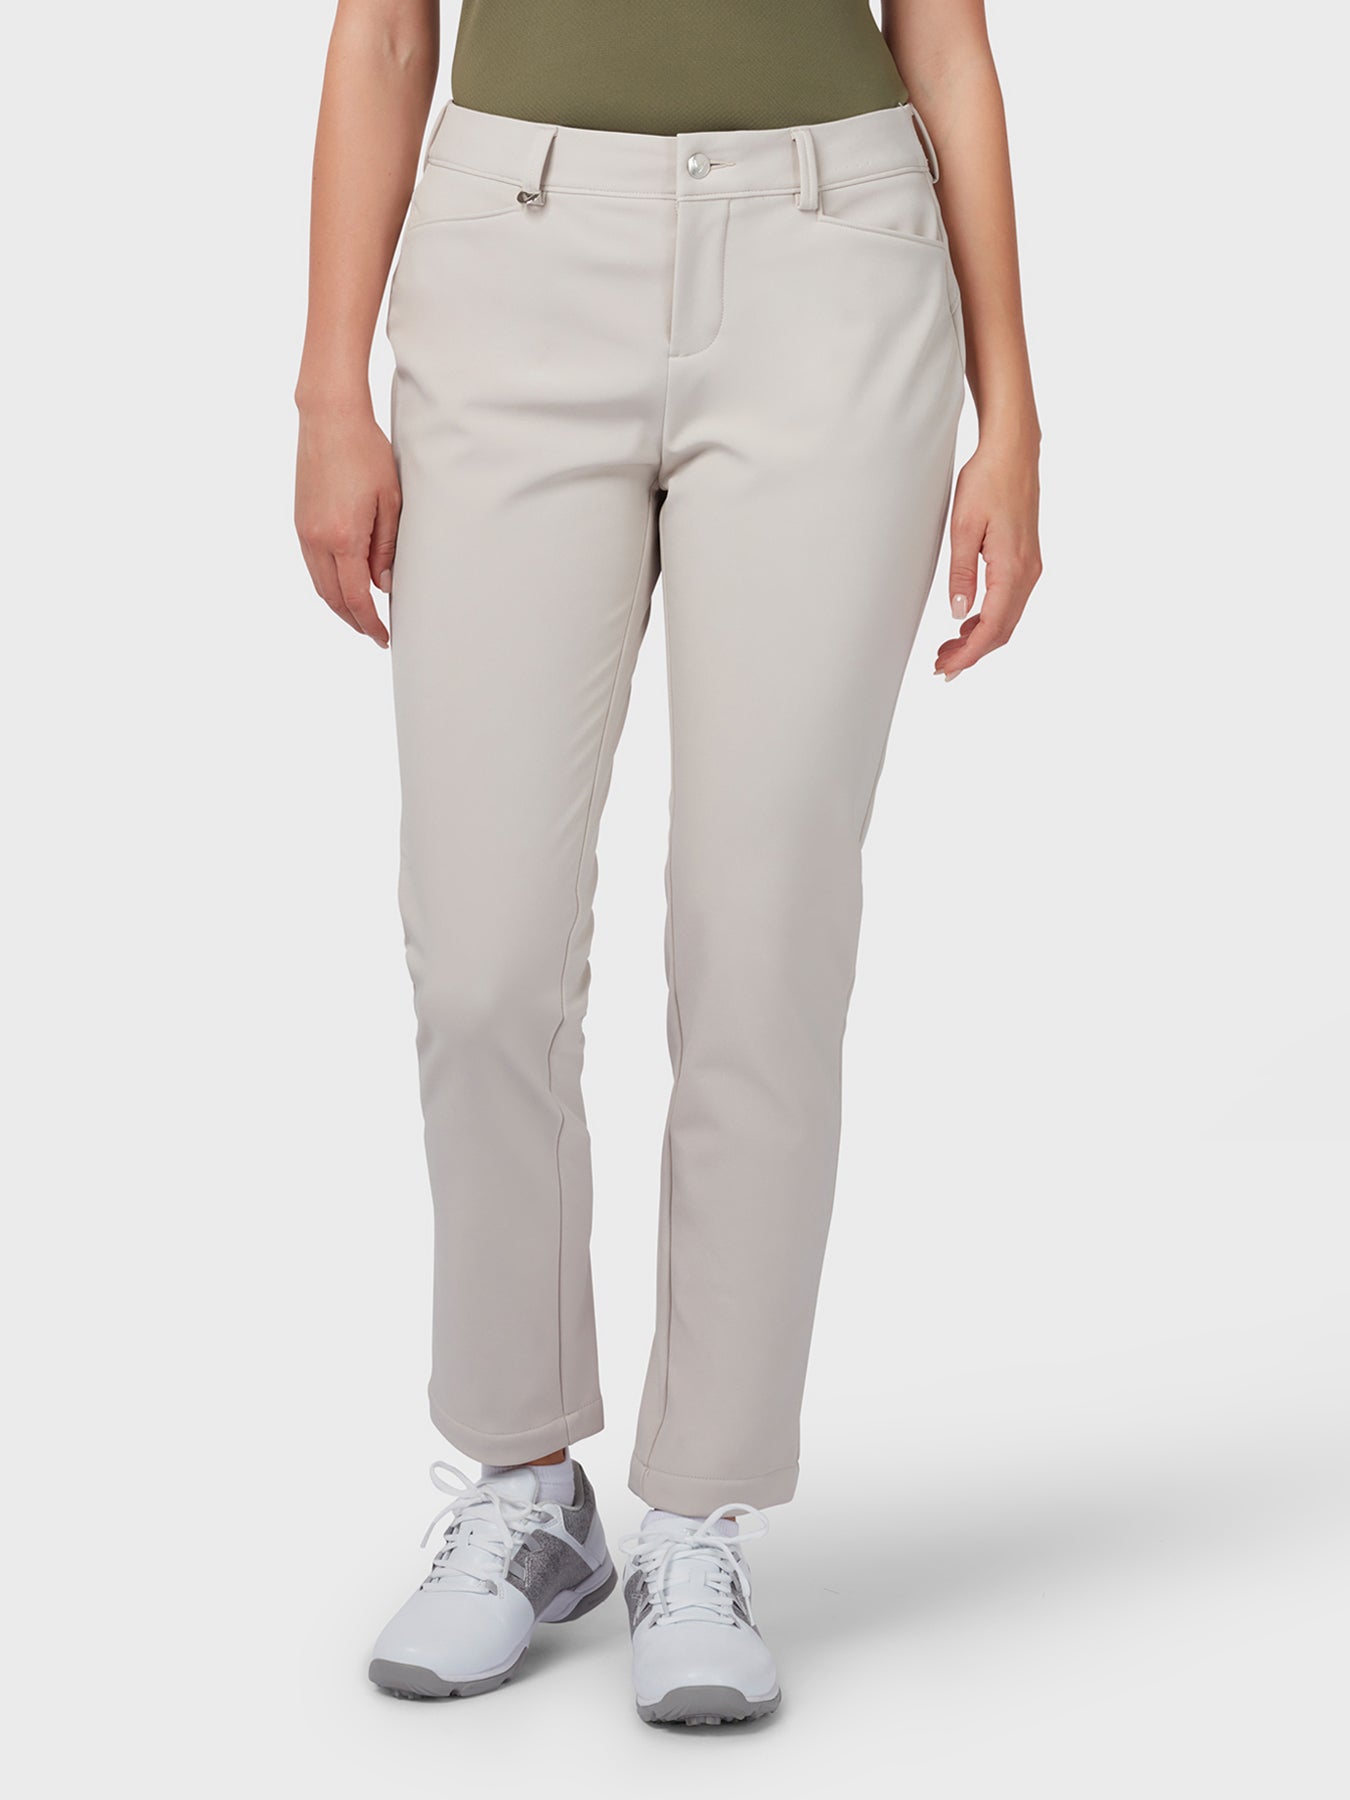 View Womens Thermal Trouser In Chateau Grey Chateau Grey XL 29 information